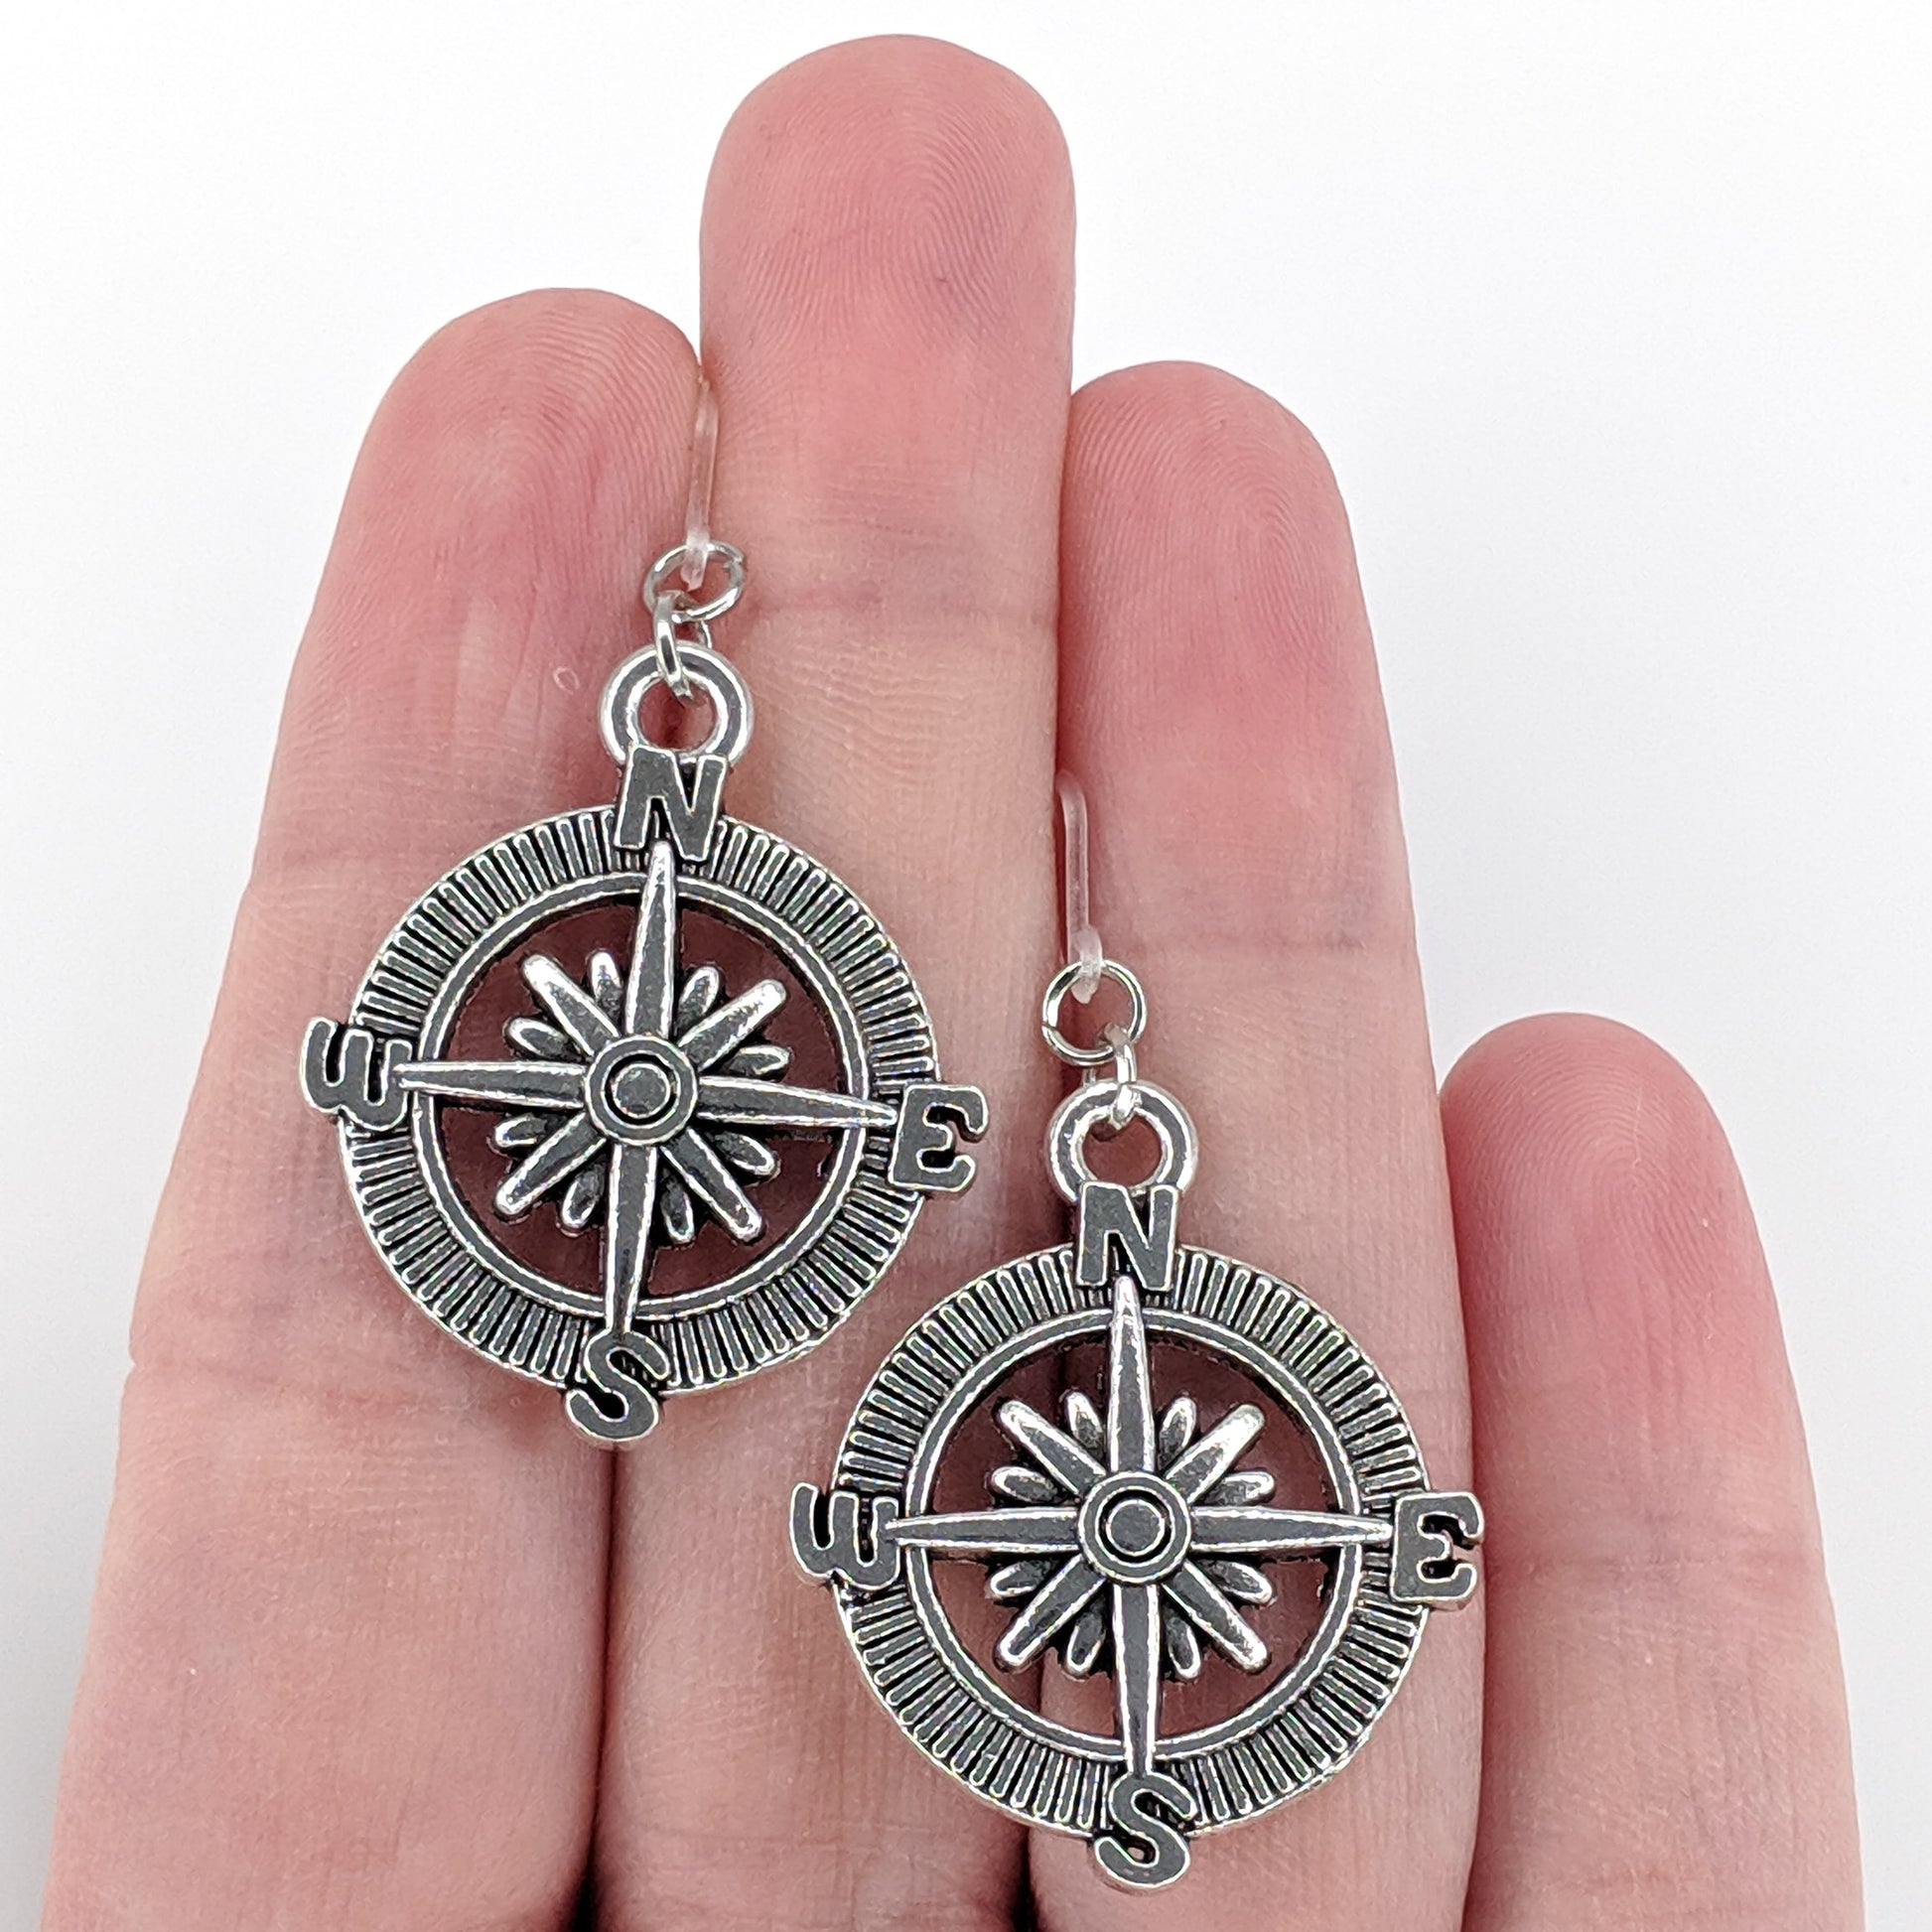 Compass Rose Earrings (Dangles) - size comparison hand